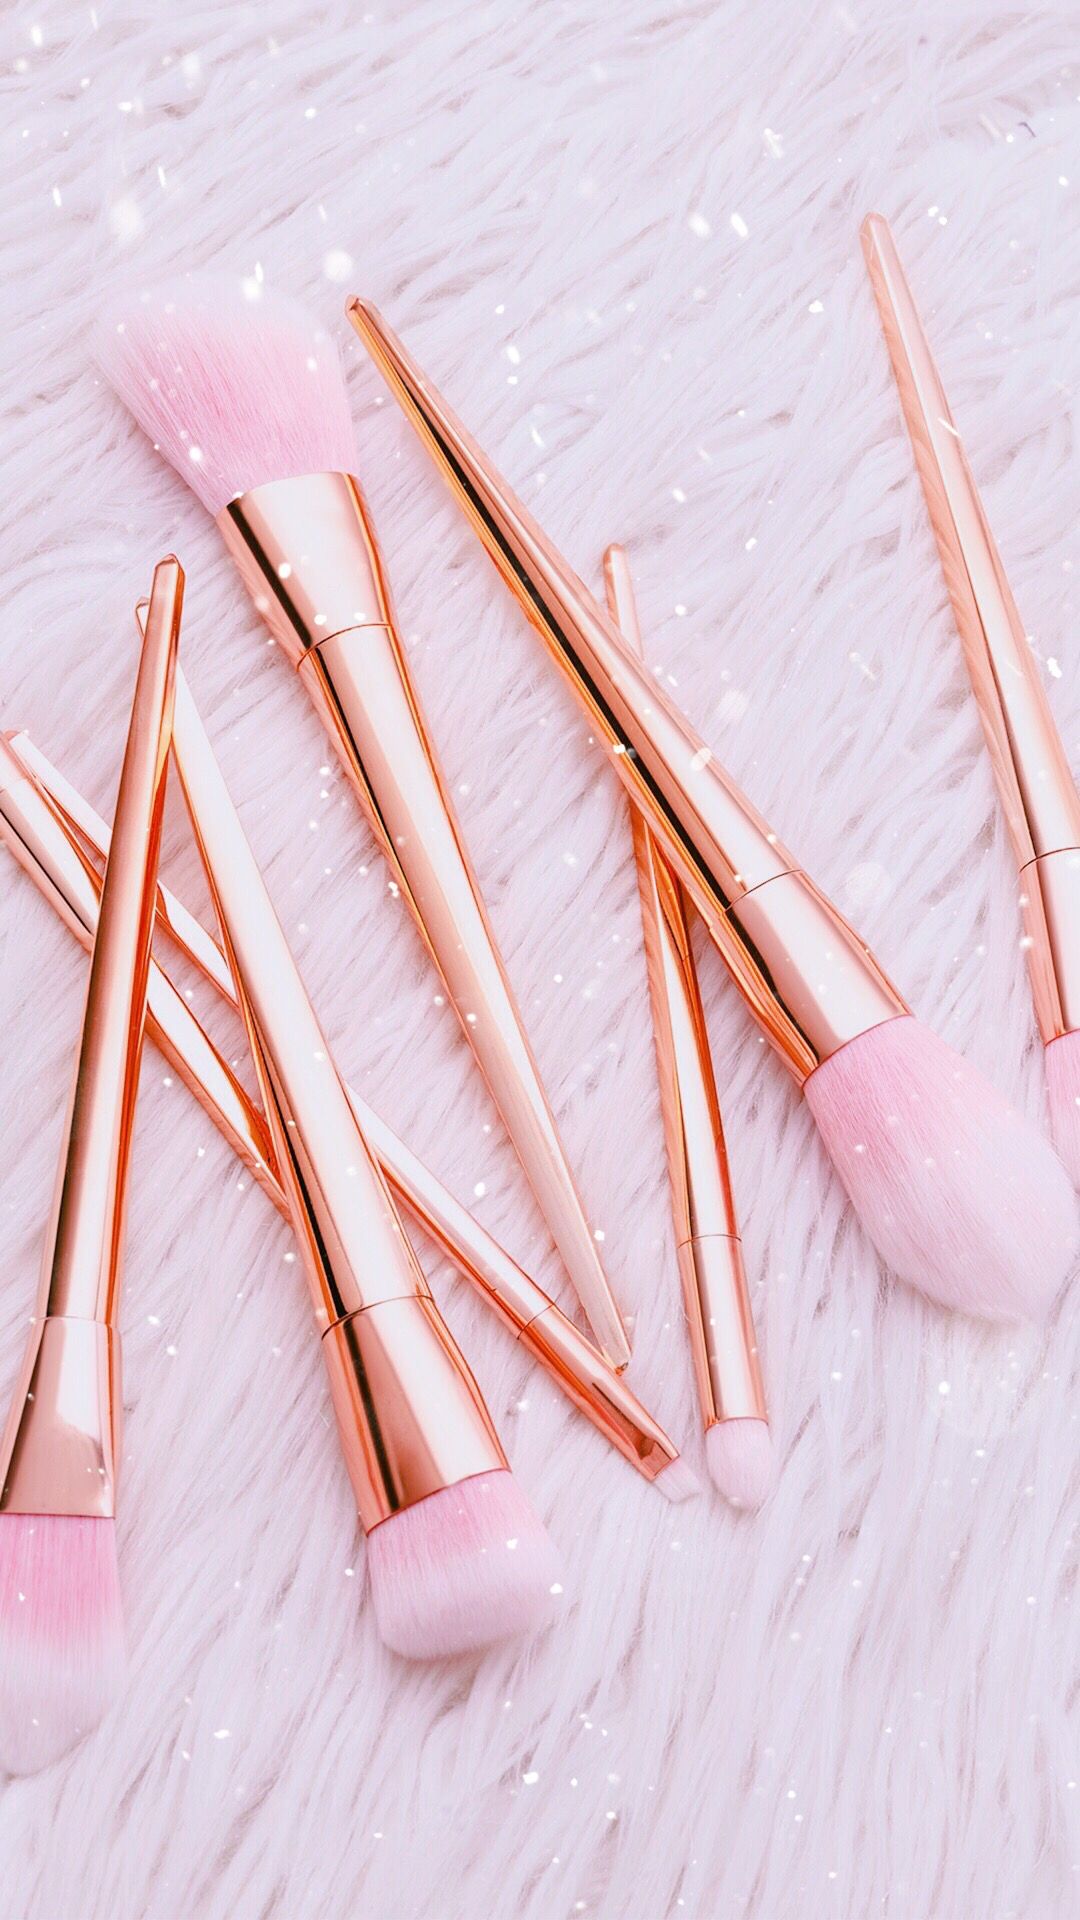 makeup wallpaper iphone,pink,personal care,nail,toothpick